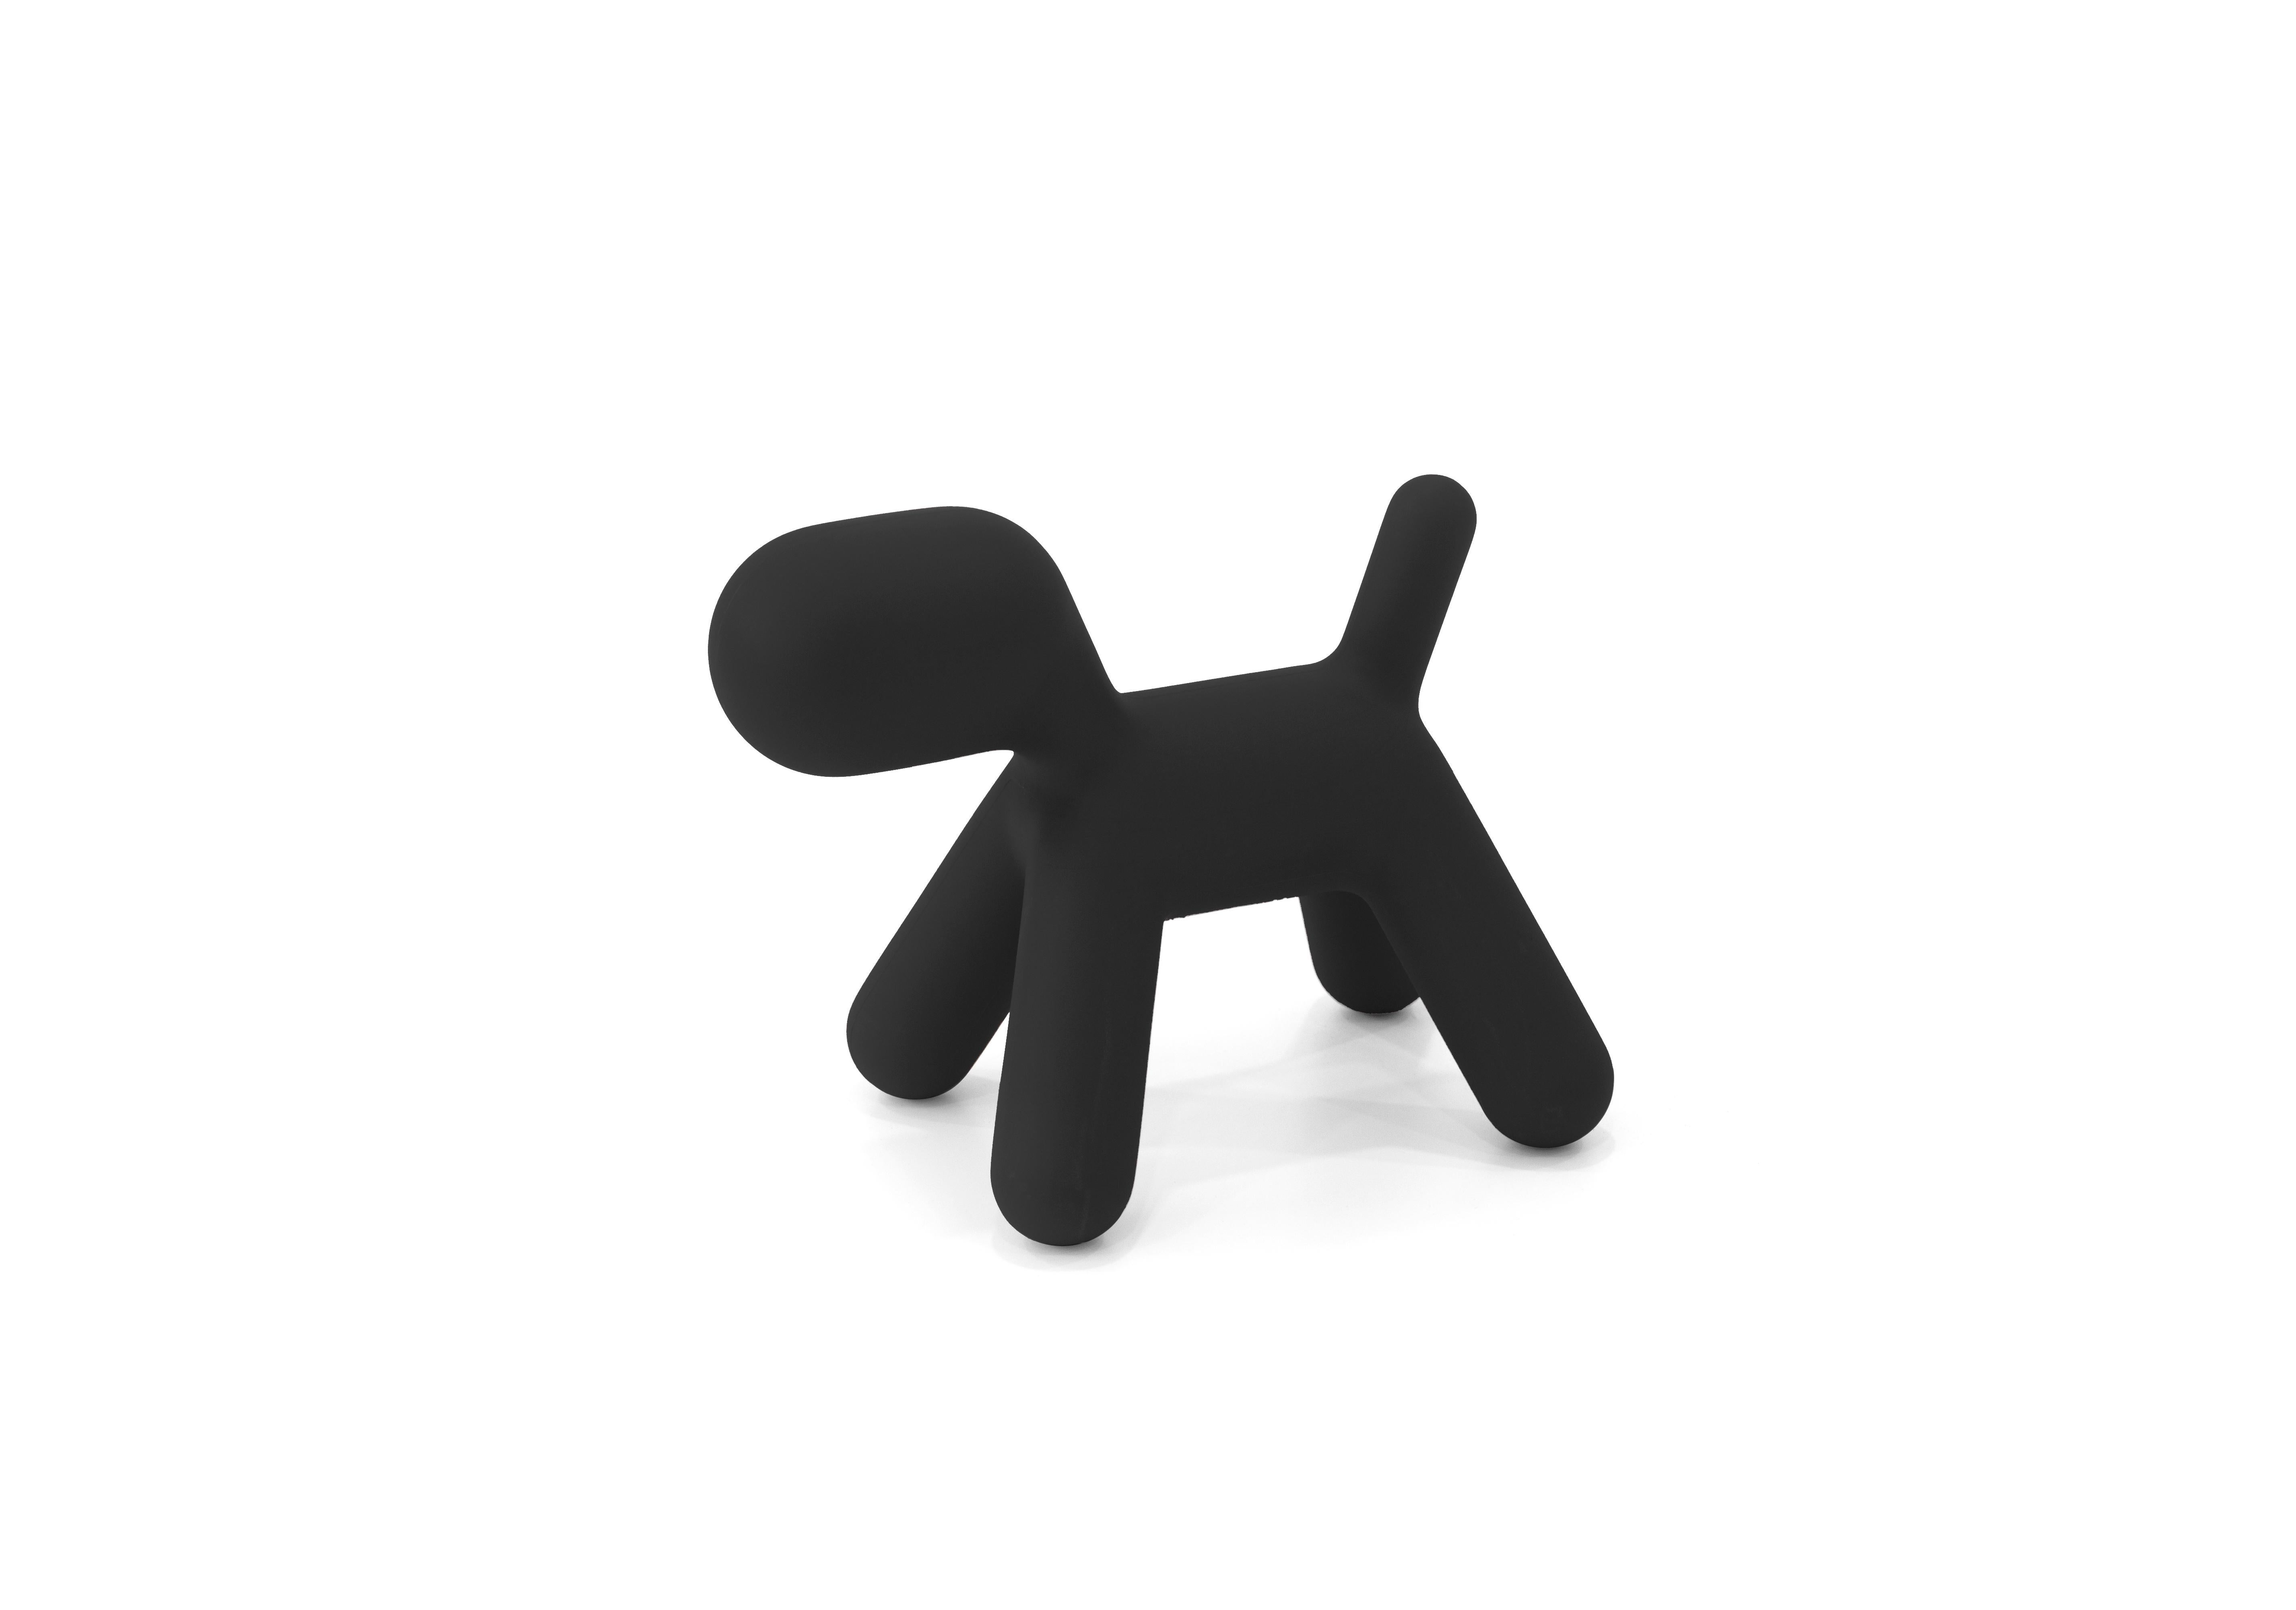 Created by Eero Aarnio, master of Scandinavian design culture and innovator on the international scene ever since the sixties, Puppy is a little dog as imagined by the great designer, whose aim was to see through children’s eyes when they draw